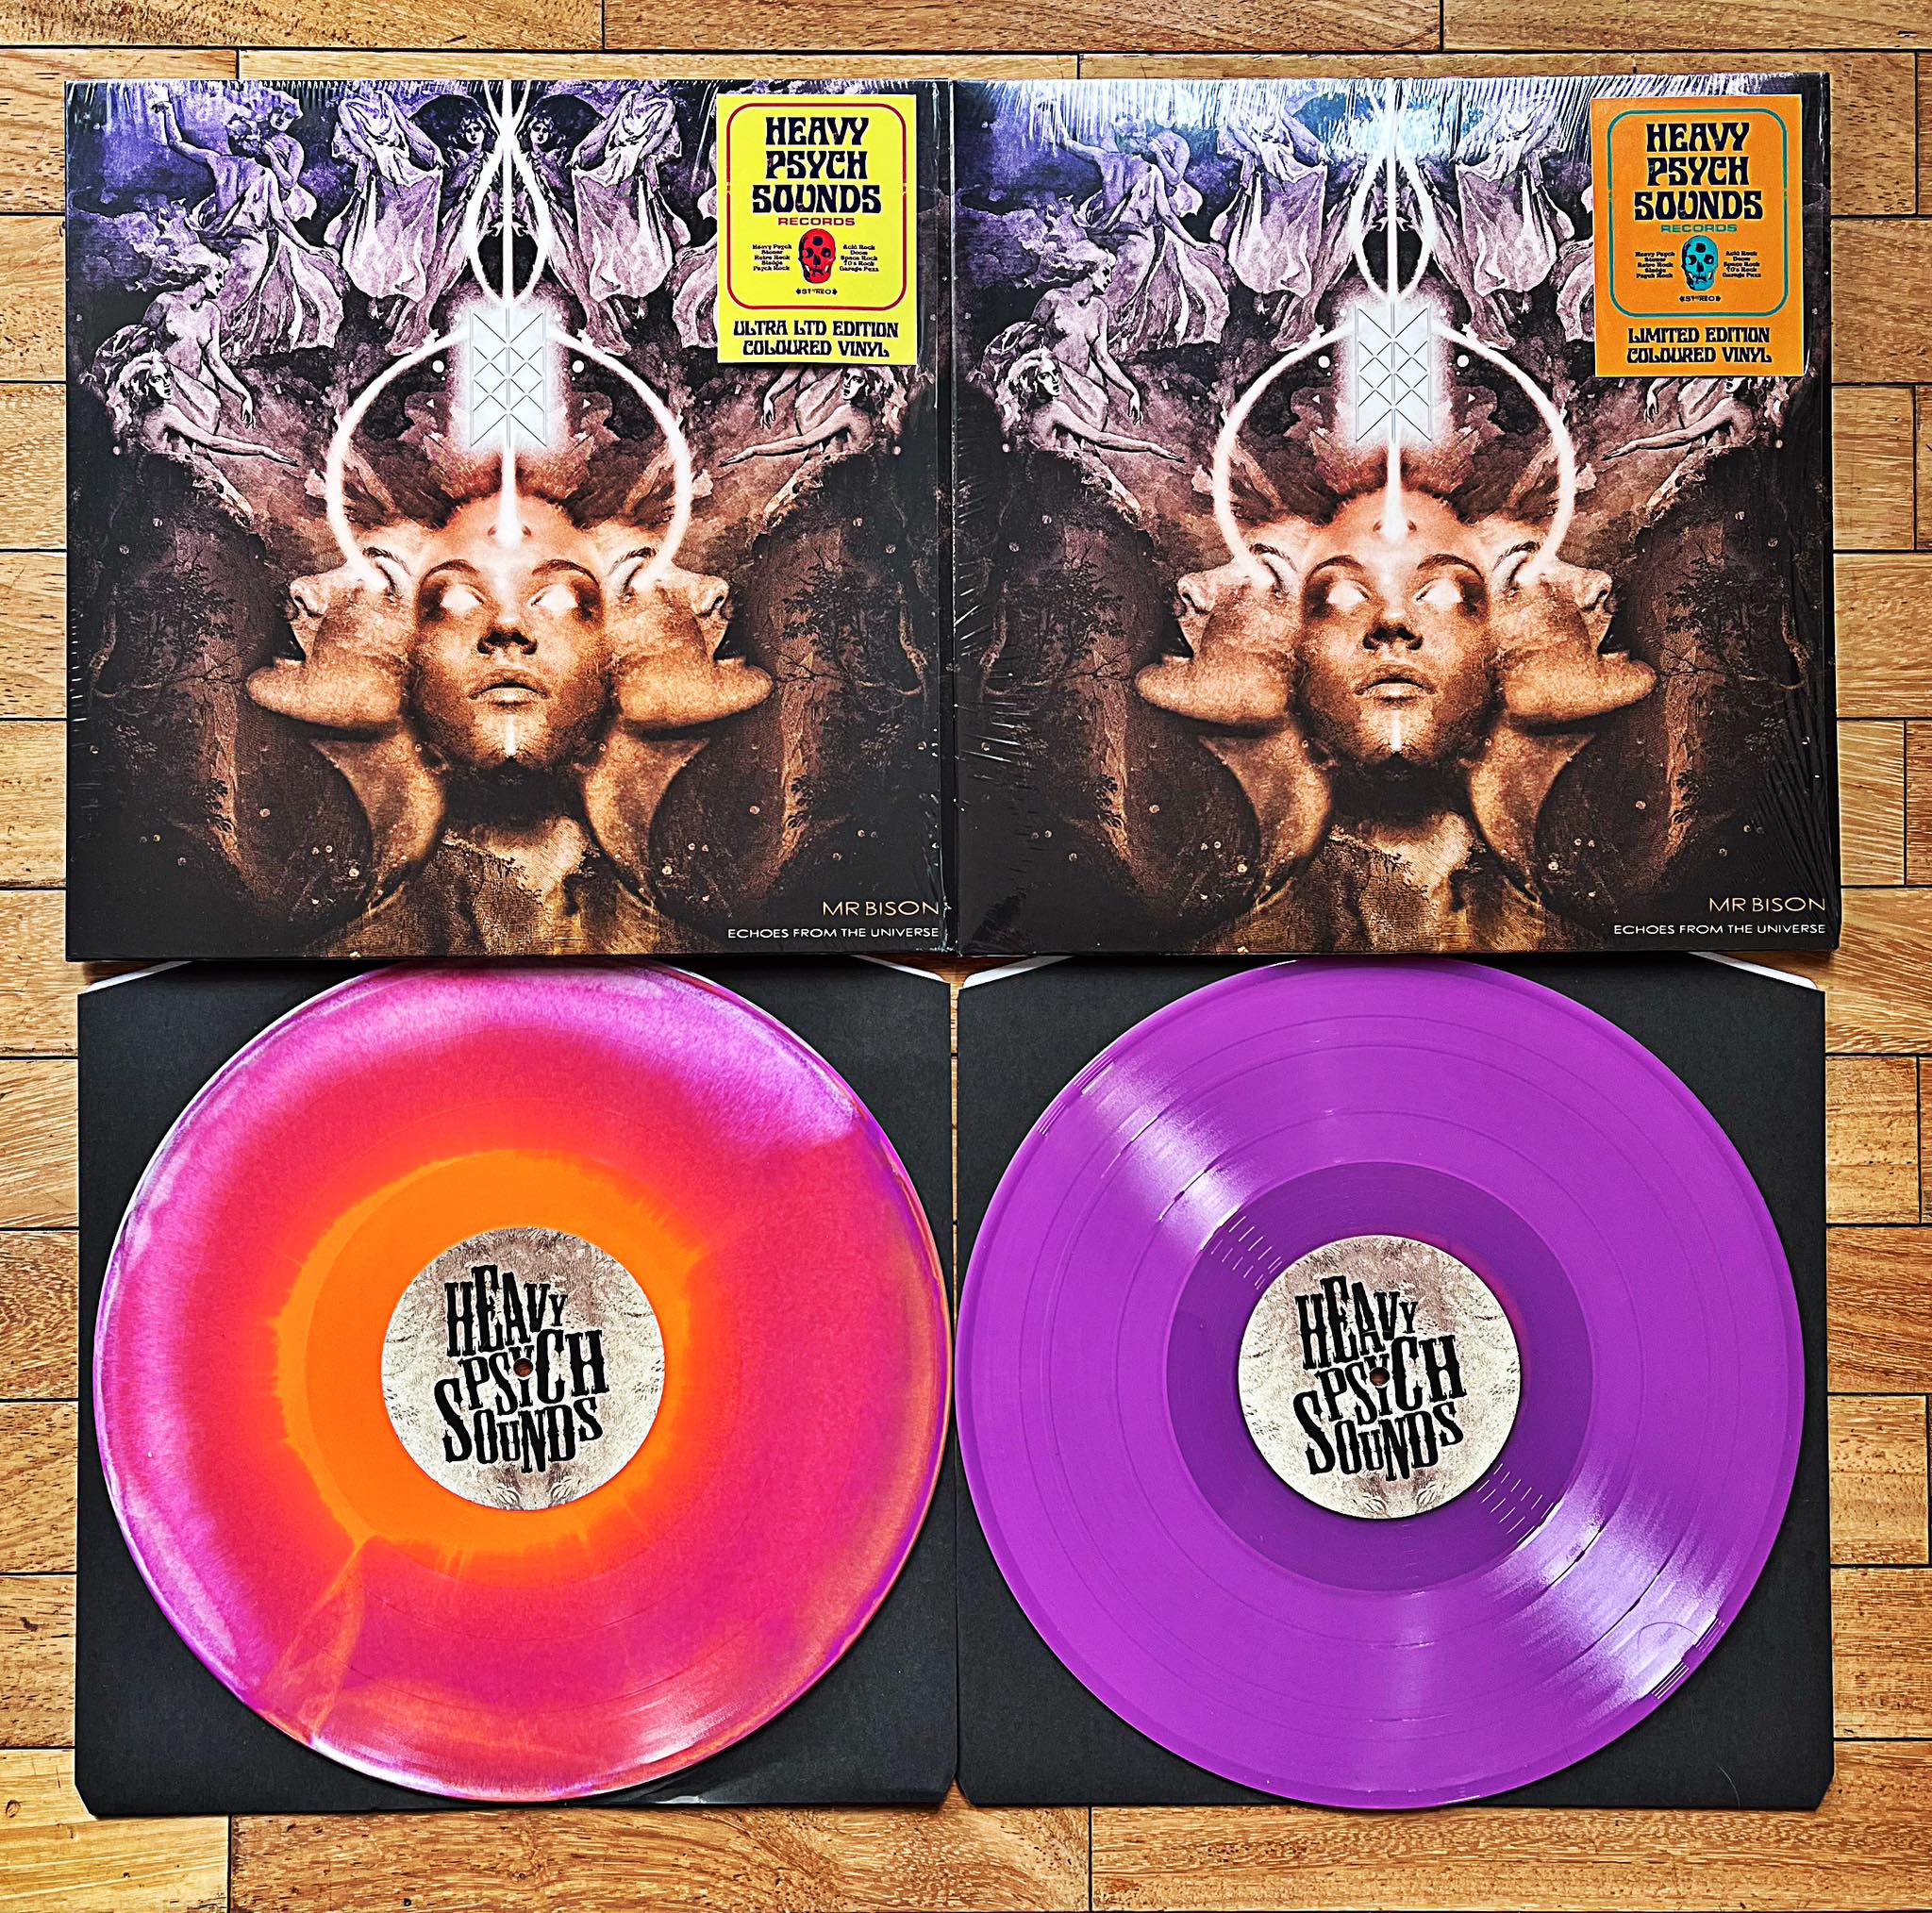 Heavy Psych Sounds to present MR.BISON new album Echoes From The Universe – OUT TODAY !!